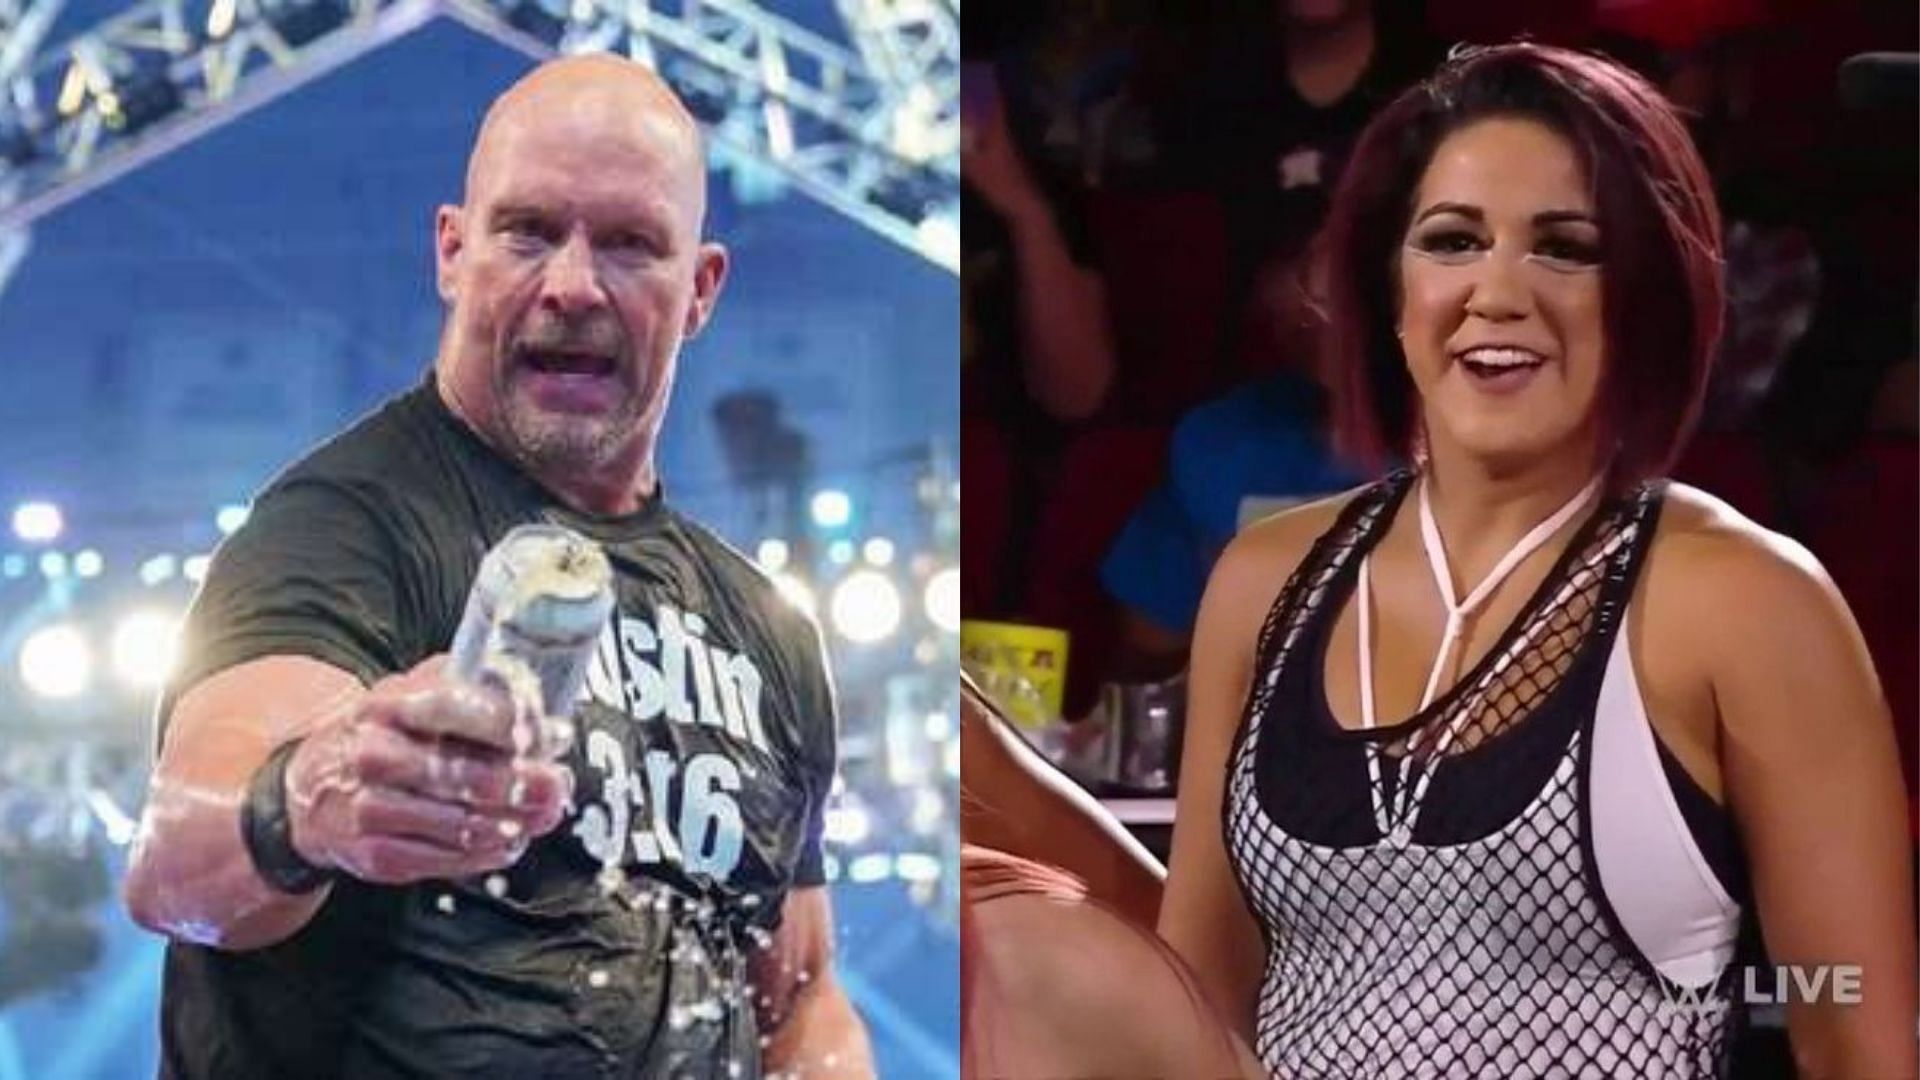 Stone Cold Steve Austin and Bayley recently interacted on Instagram